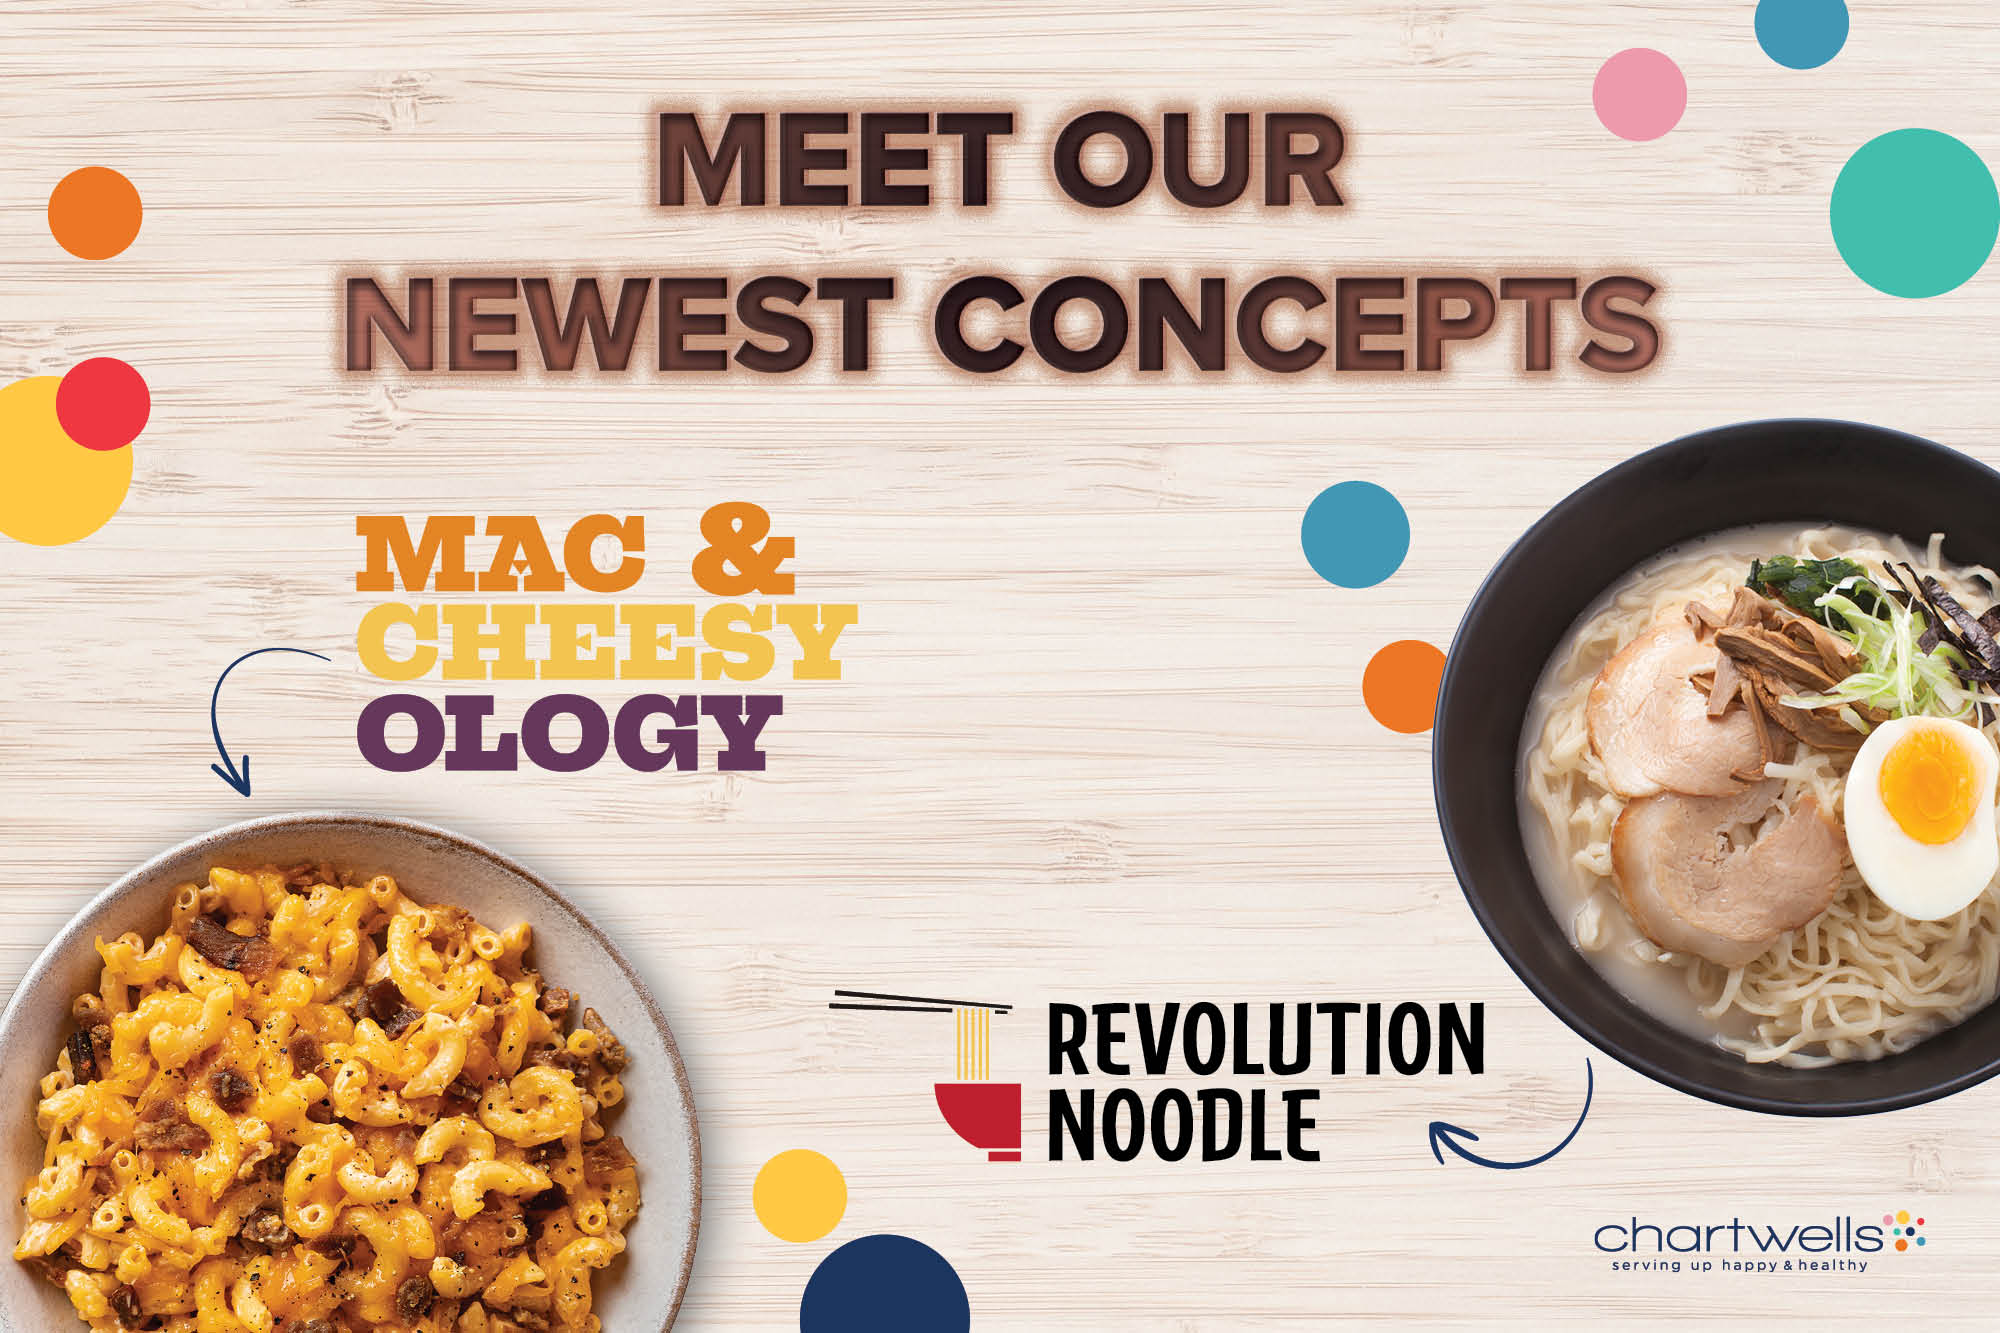 new concept mac and cheesyology and revolution noodle